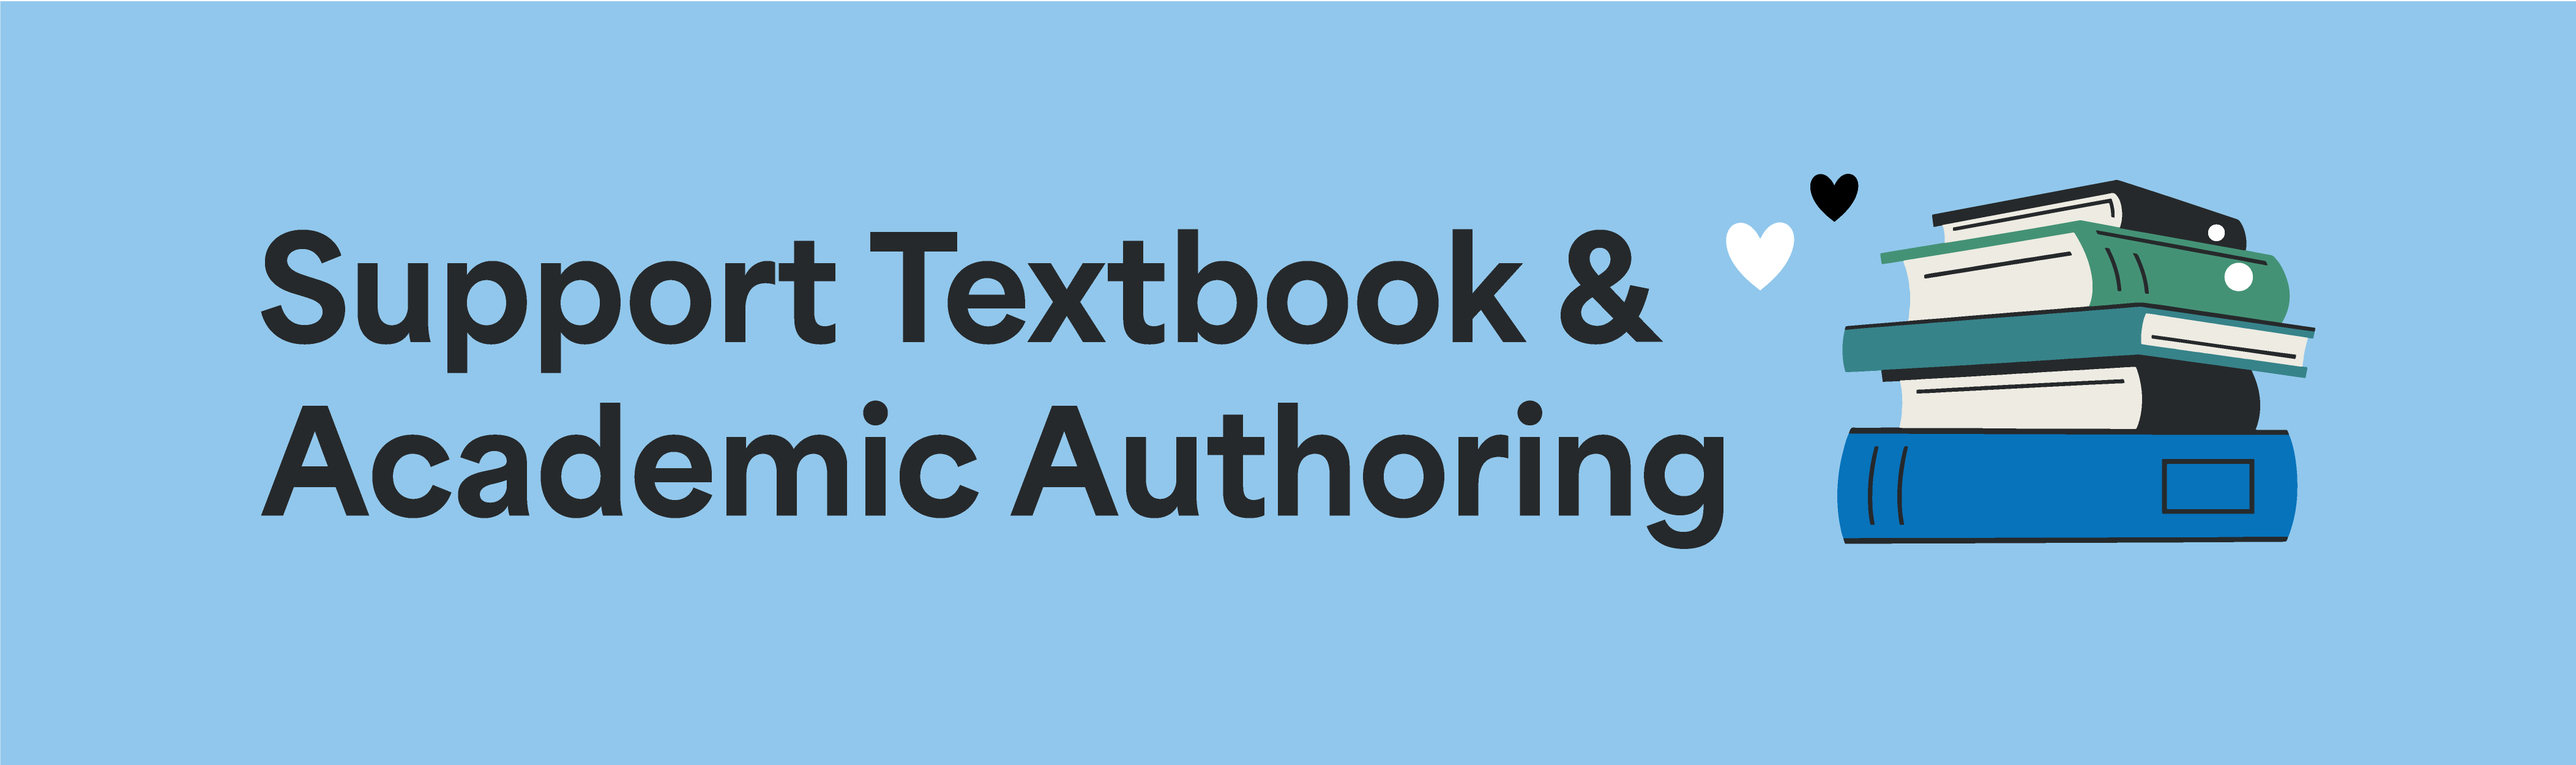 Support Textbook & Academic Authoring